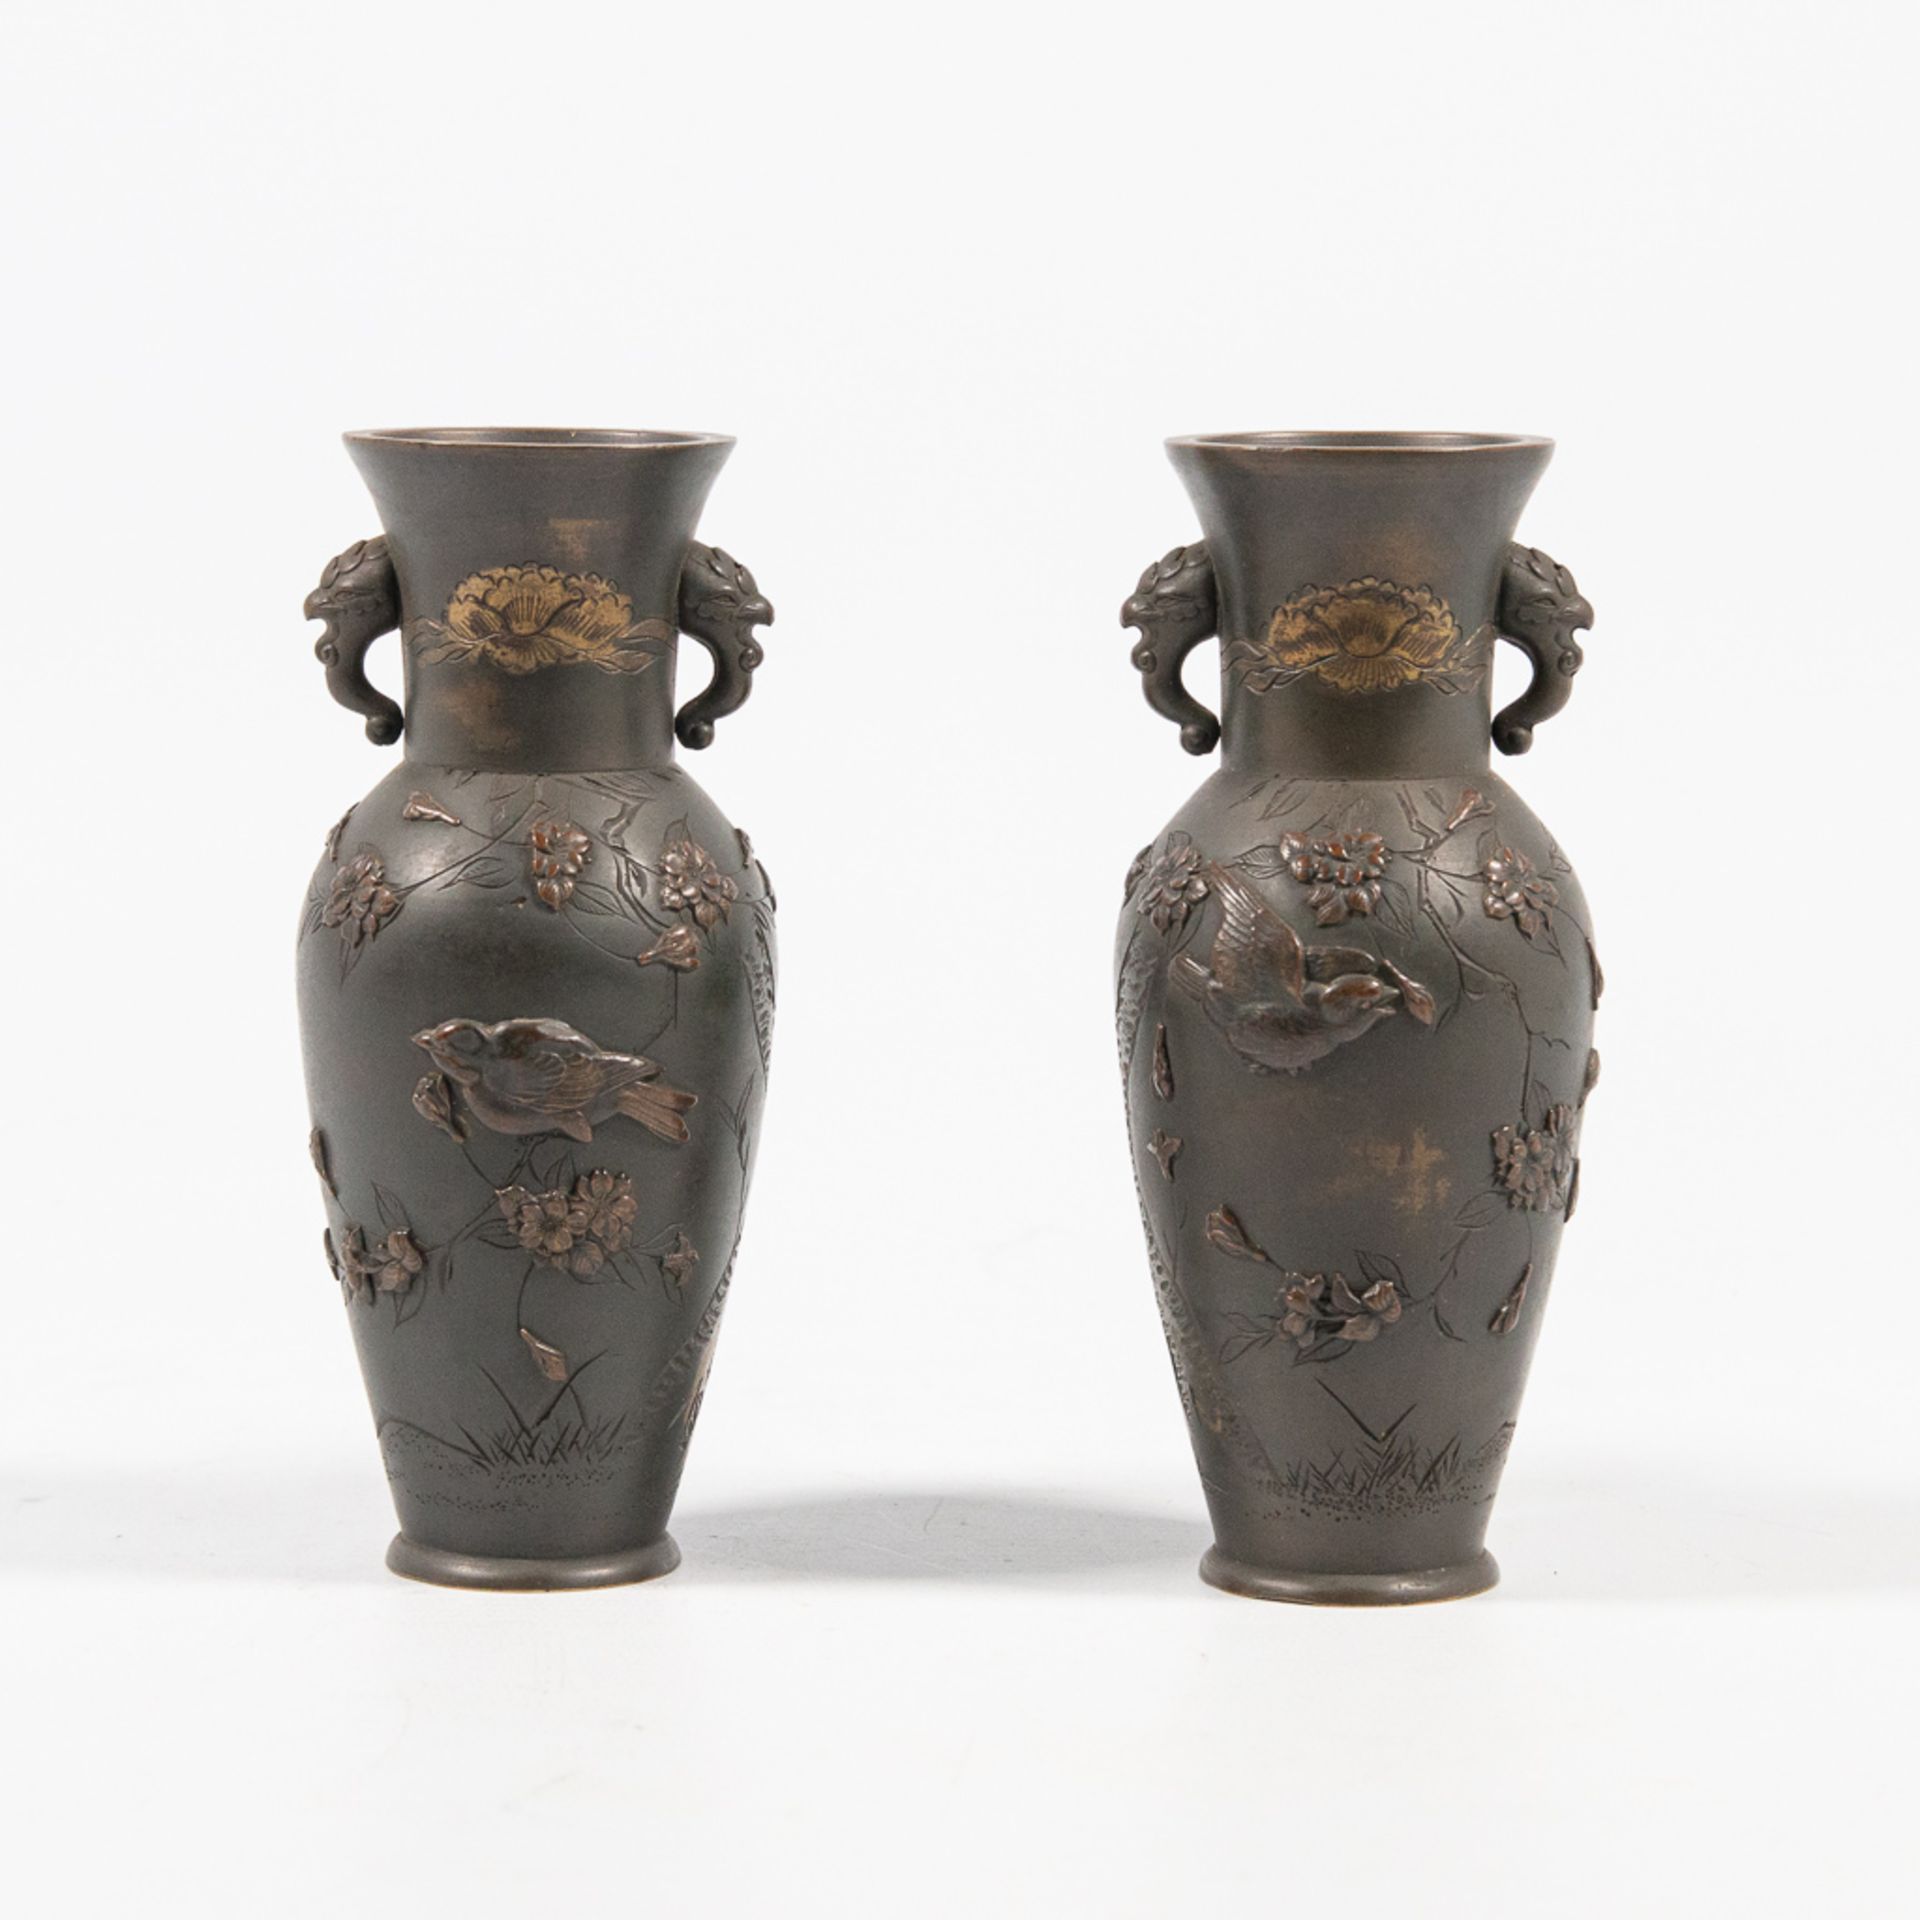 Pair of Japanese small vases.